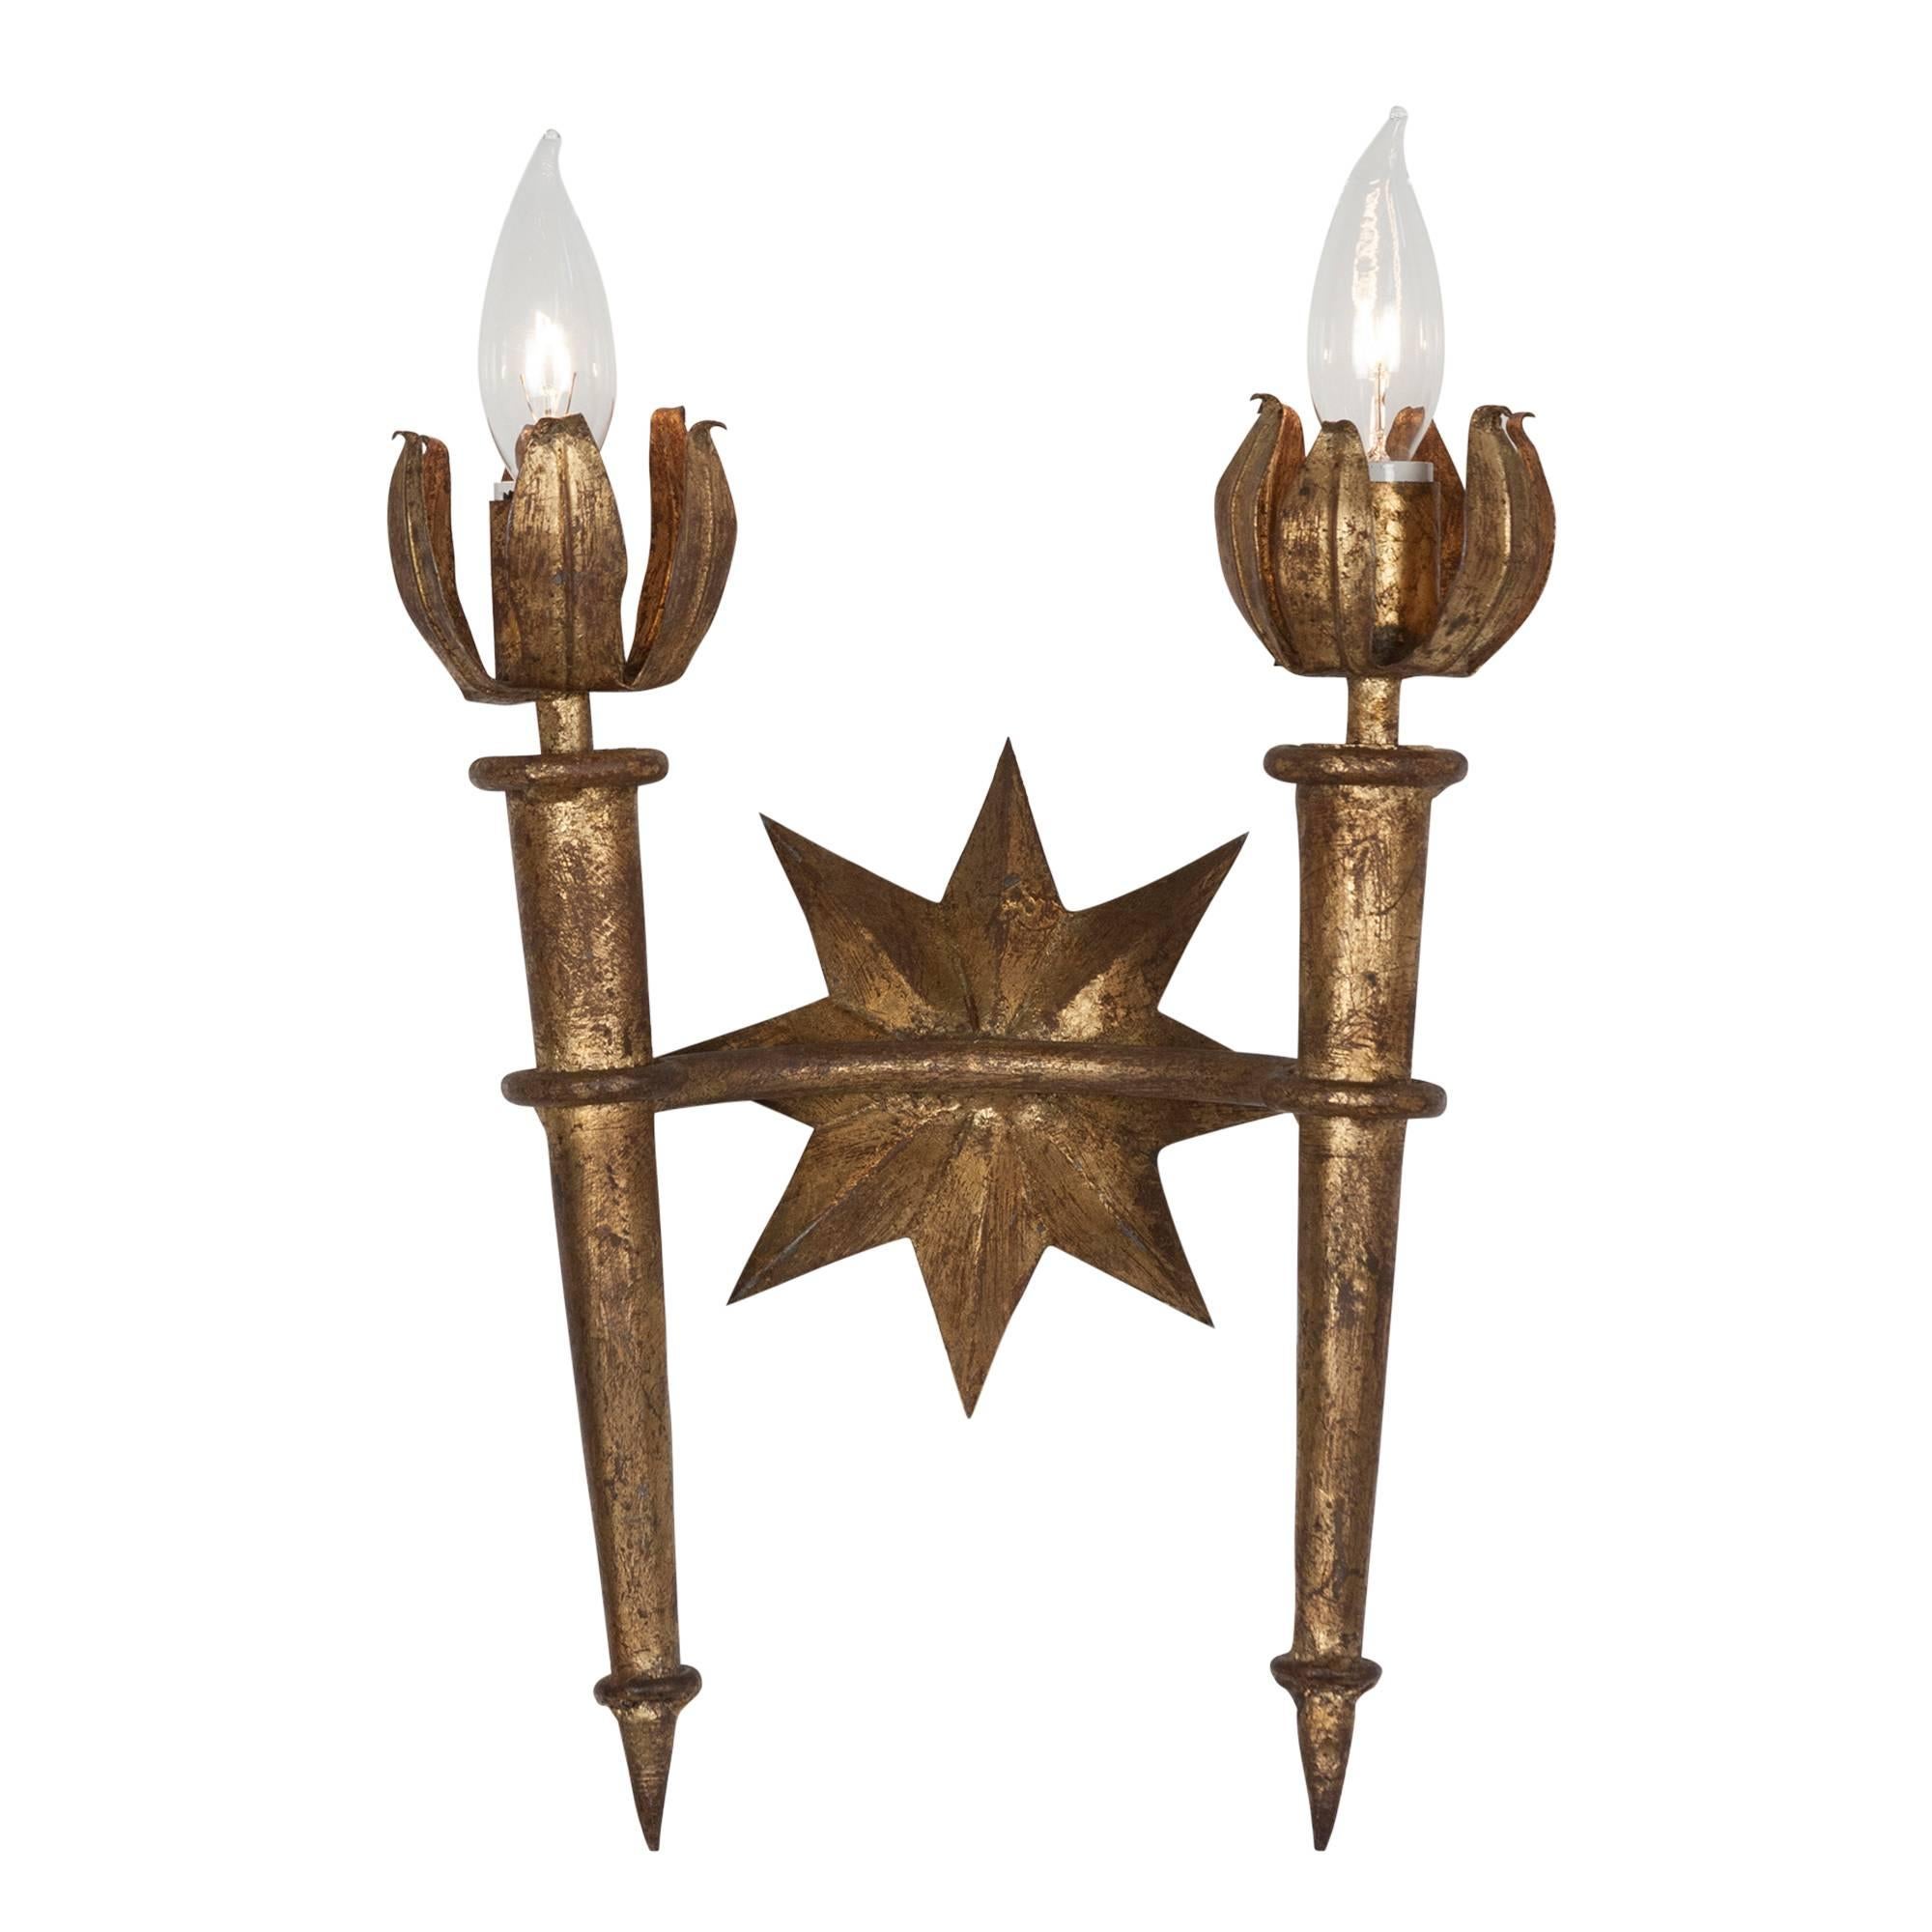 Pair of two arm torch form doré metal wall sconces, the torch tapering and finishing with petal flame bulb surround, with centre star form, in the style of Gilbert Poillerat, French, 1940s. Measures: Height to top of bulb 17 1/2 in, width 10 1/2 in.